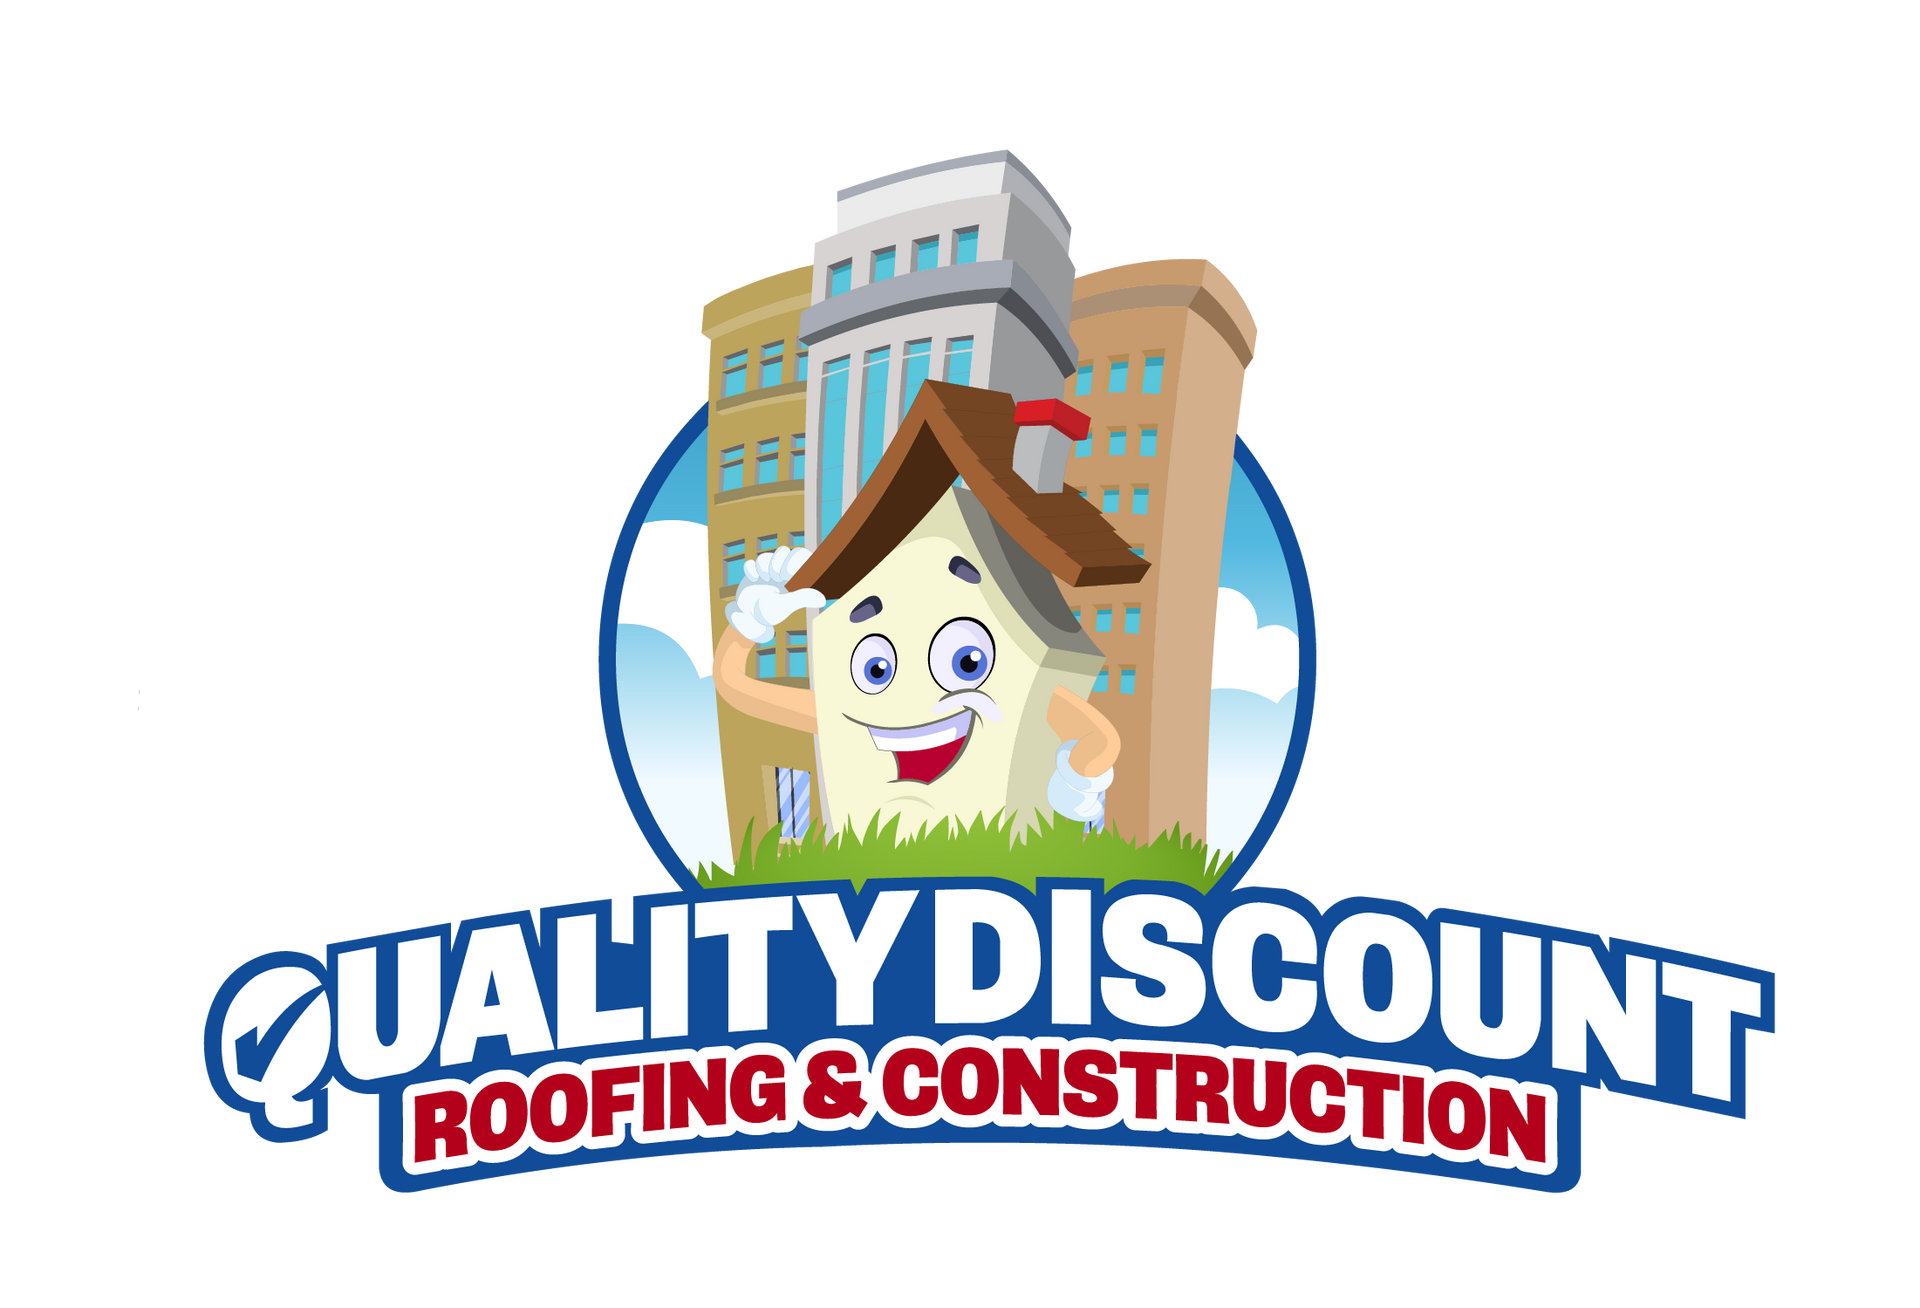 Quality Discount Roofing & Construction